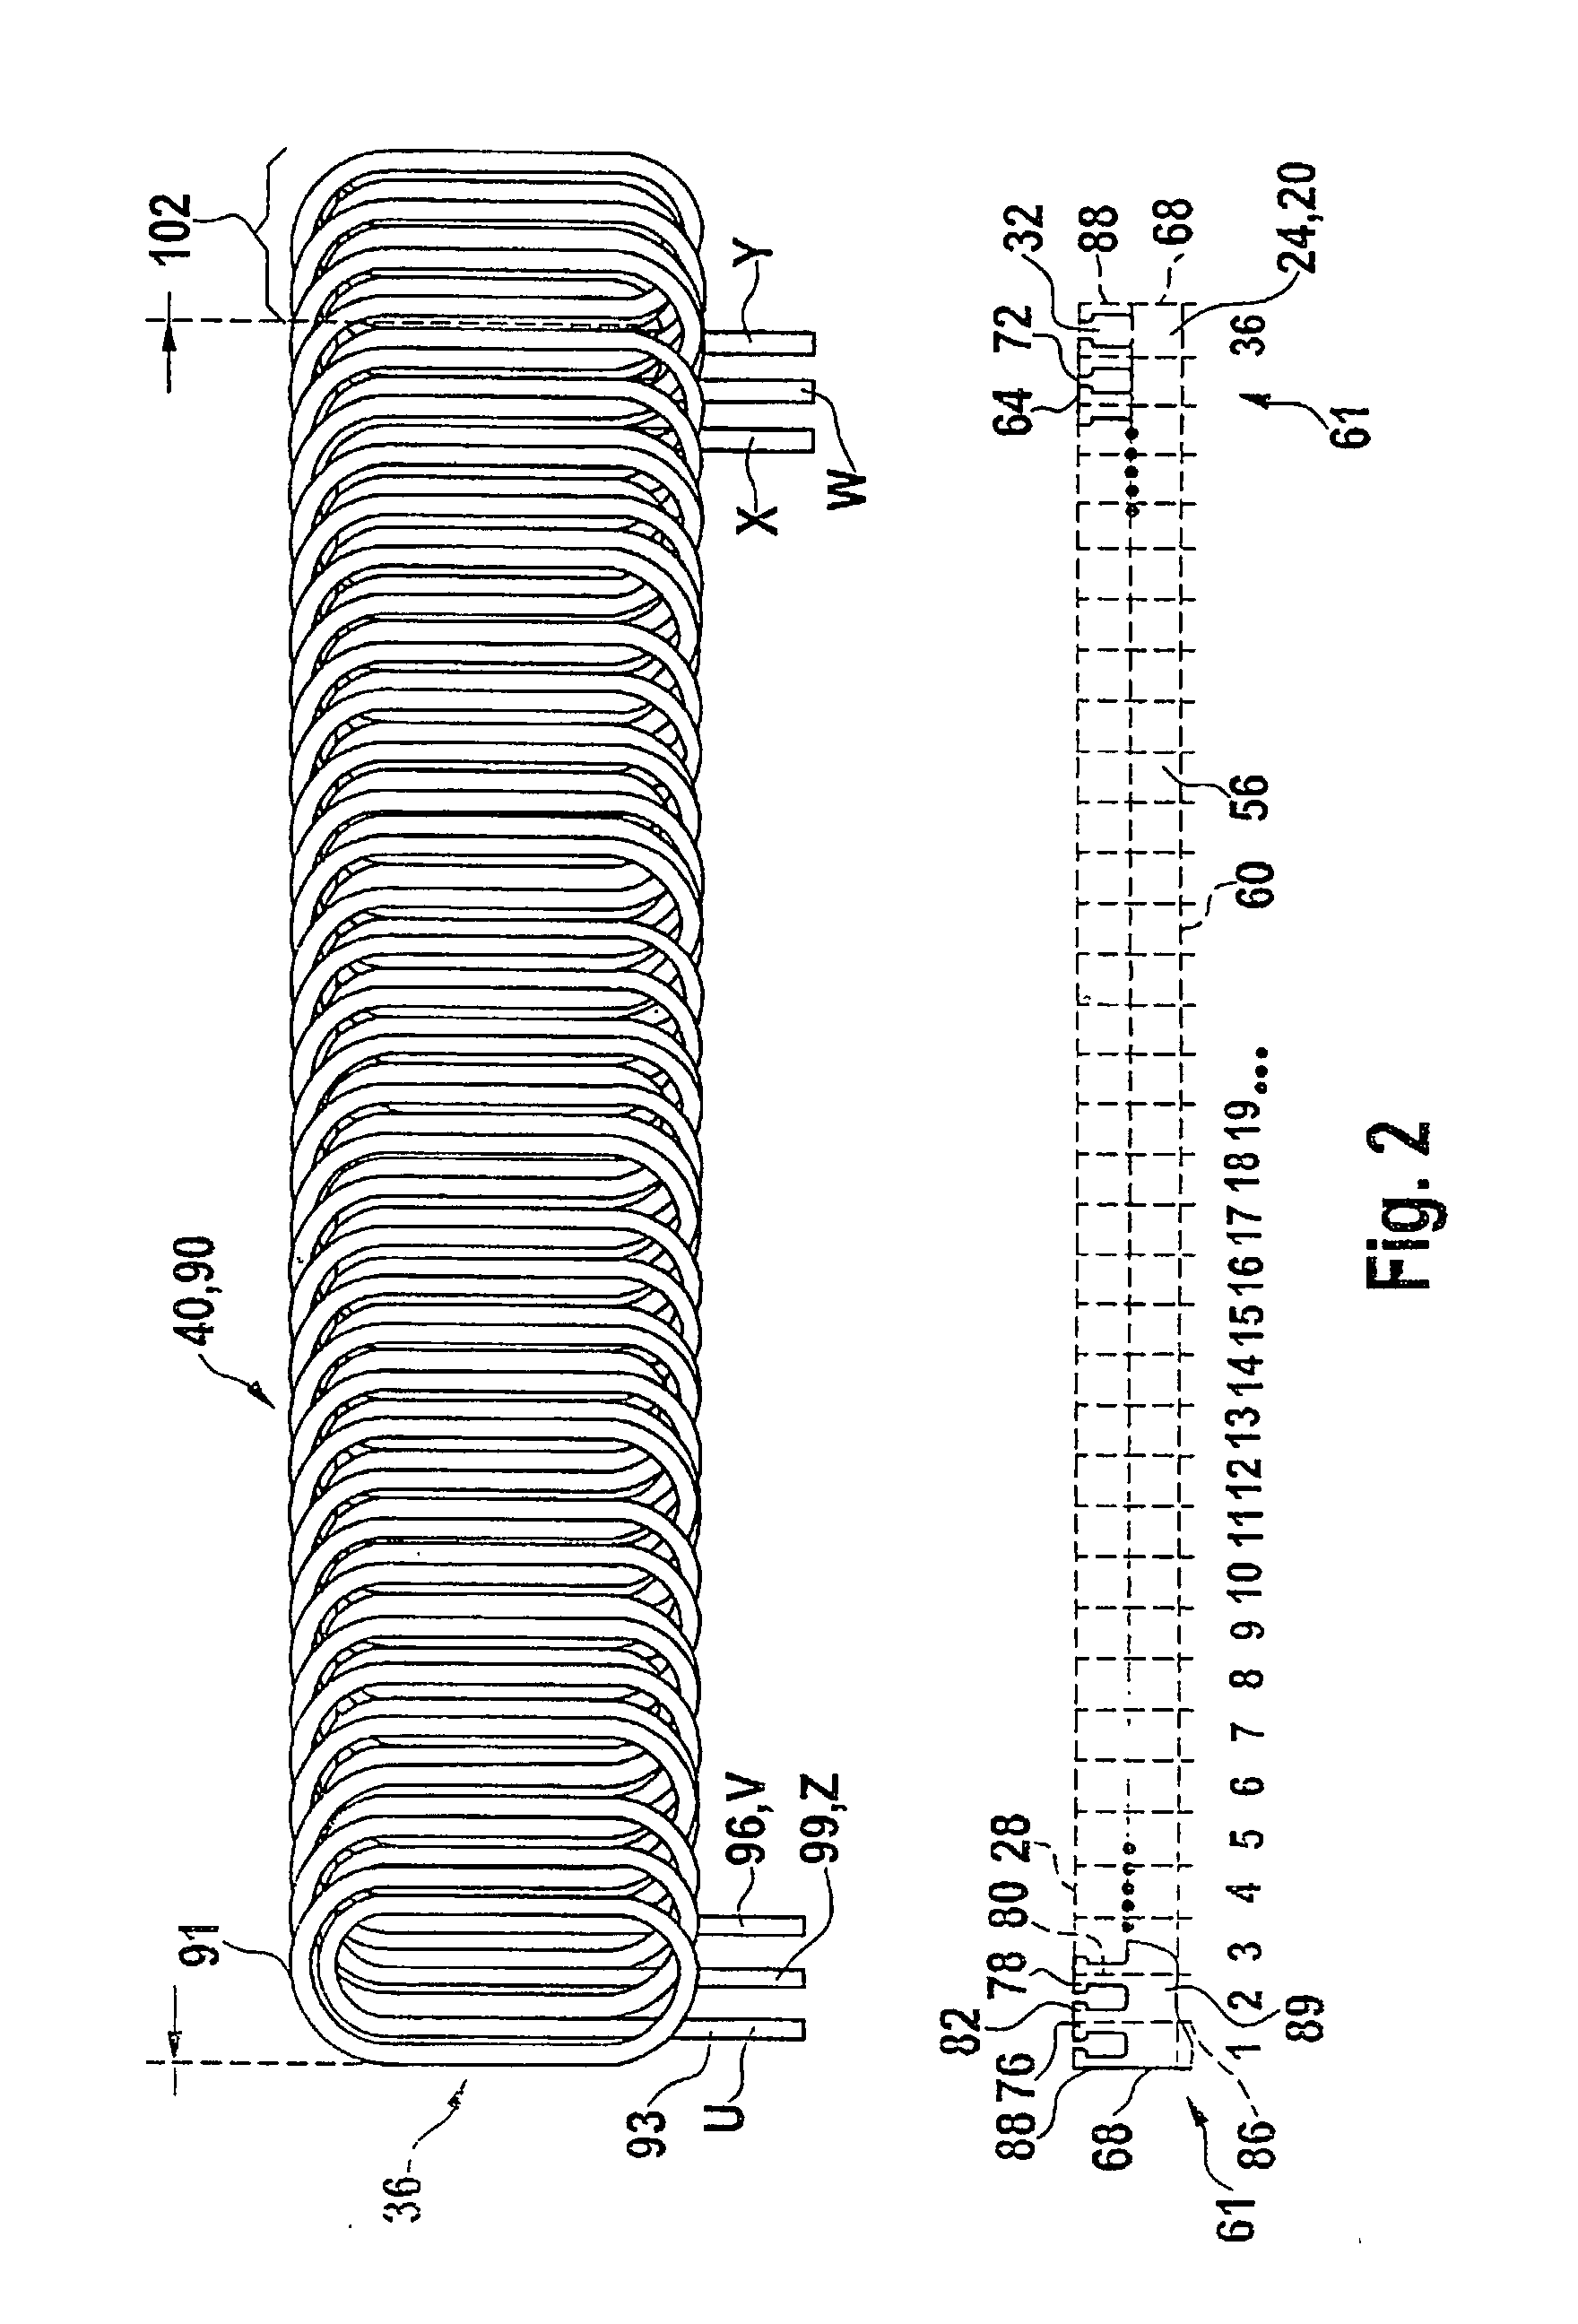 Method for producing a magnetically excitable core comprising a core winding for an electric machine